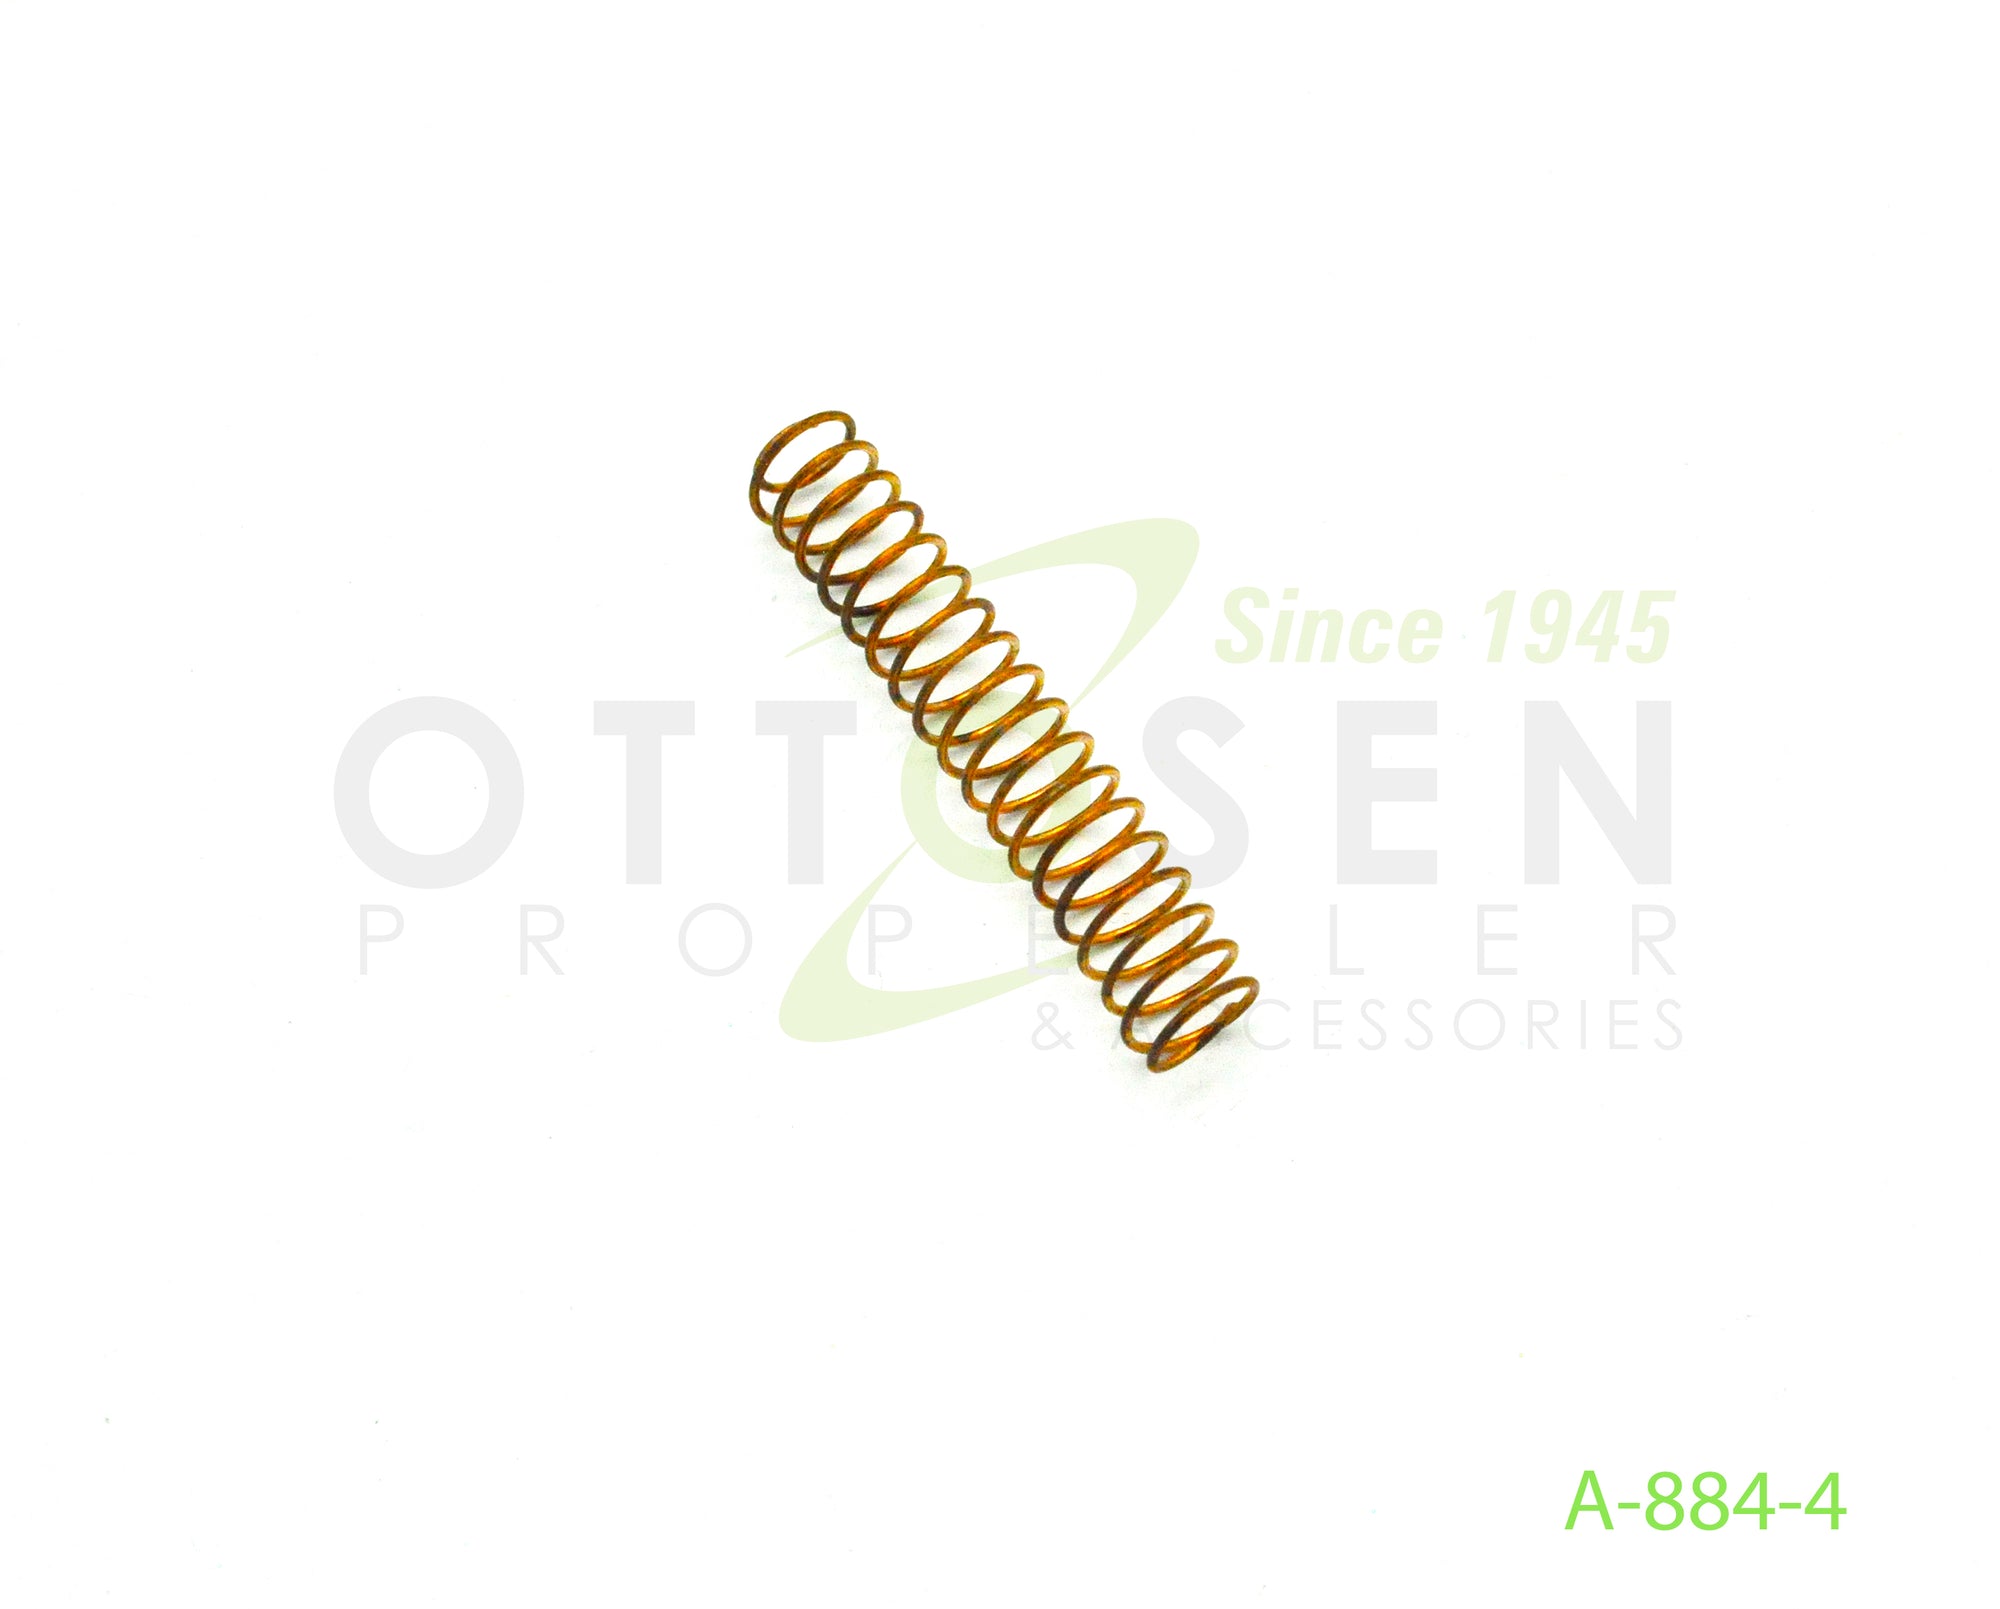 A-884-4-HARTZELL-PROPELLER-COMPRESSION-SPRING-PICTURE-1